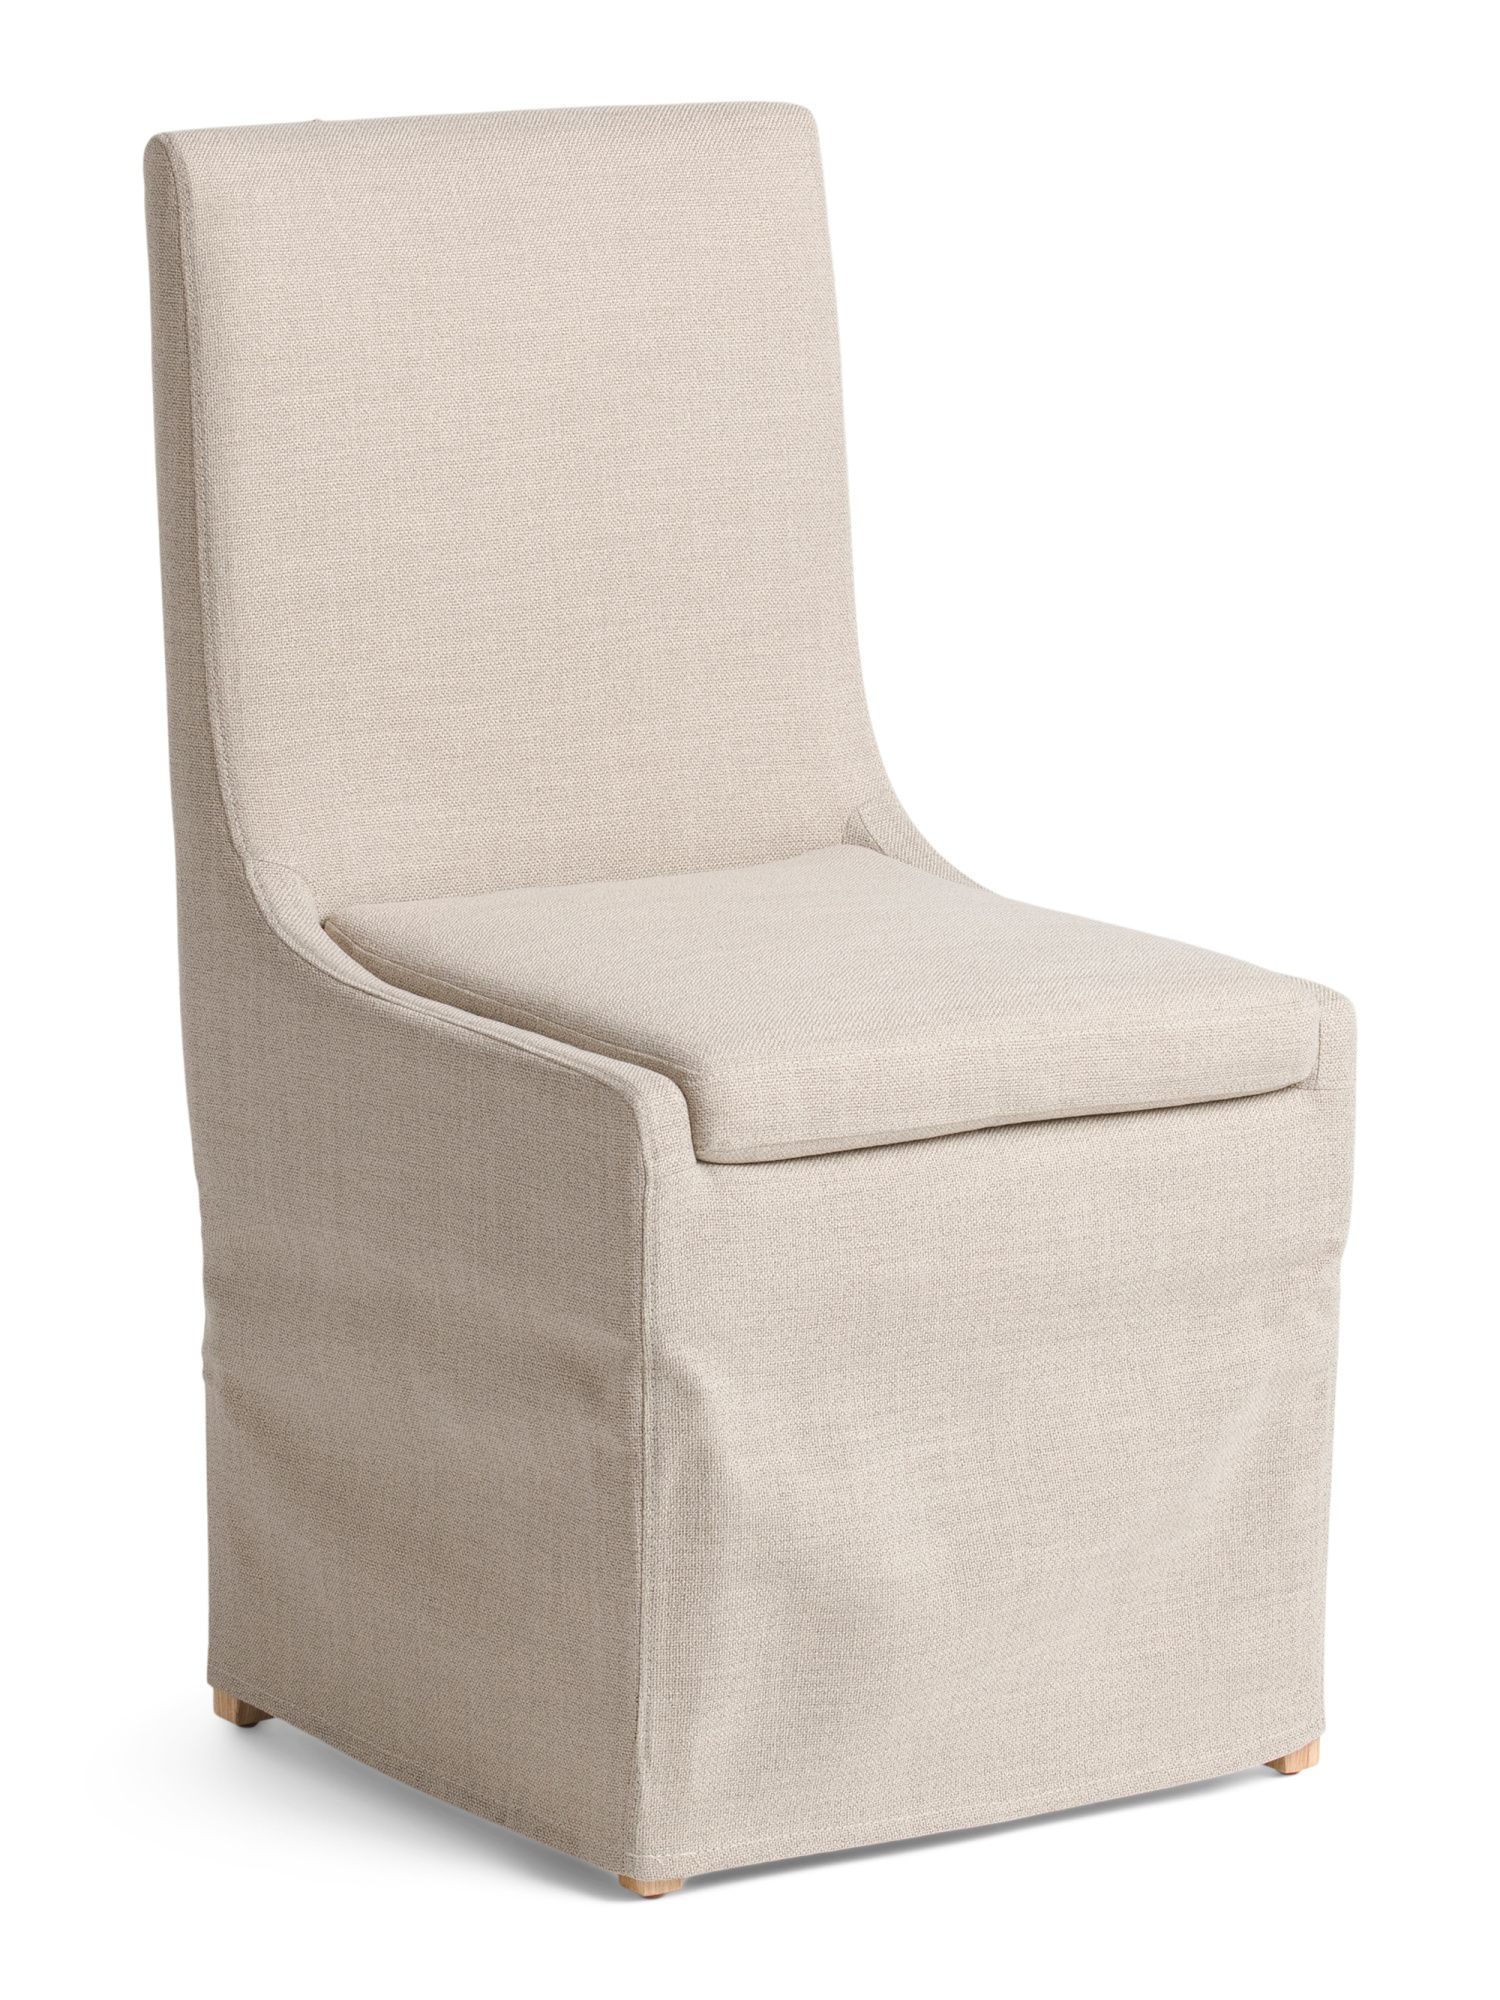 Slope Arm Slipcover Chair In Performance Fabric | Marshalls